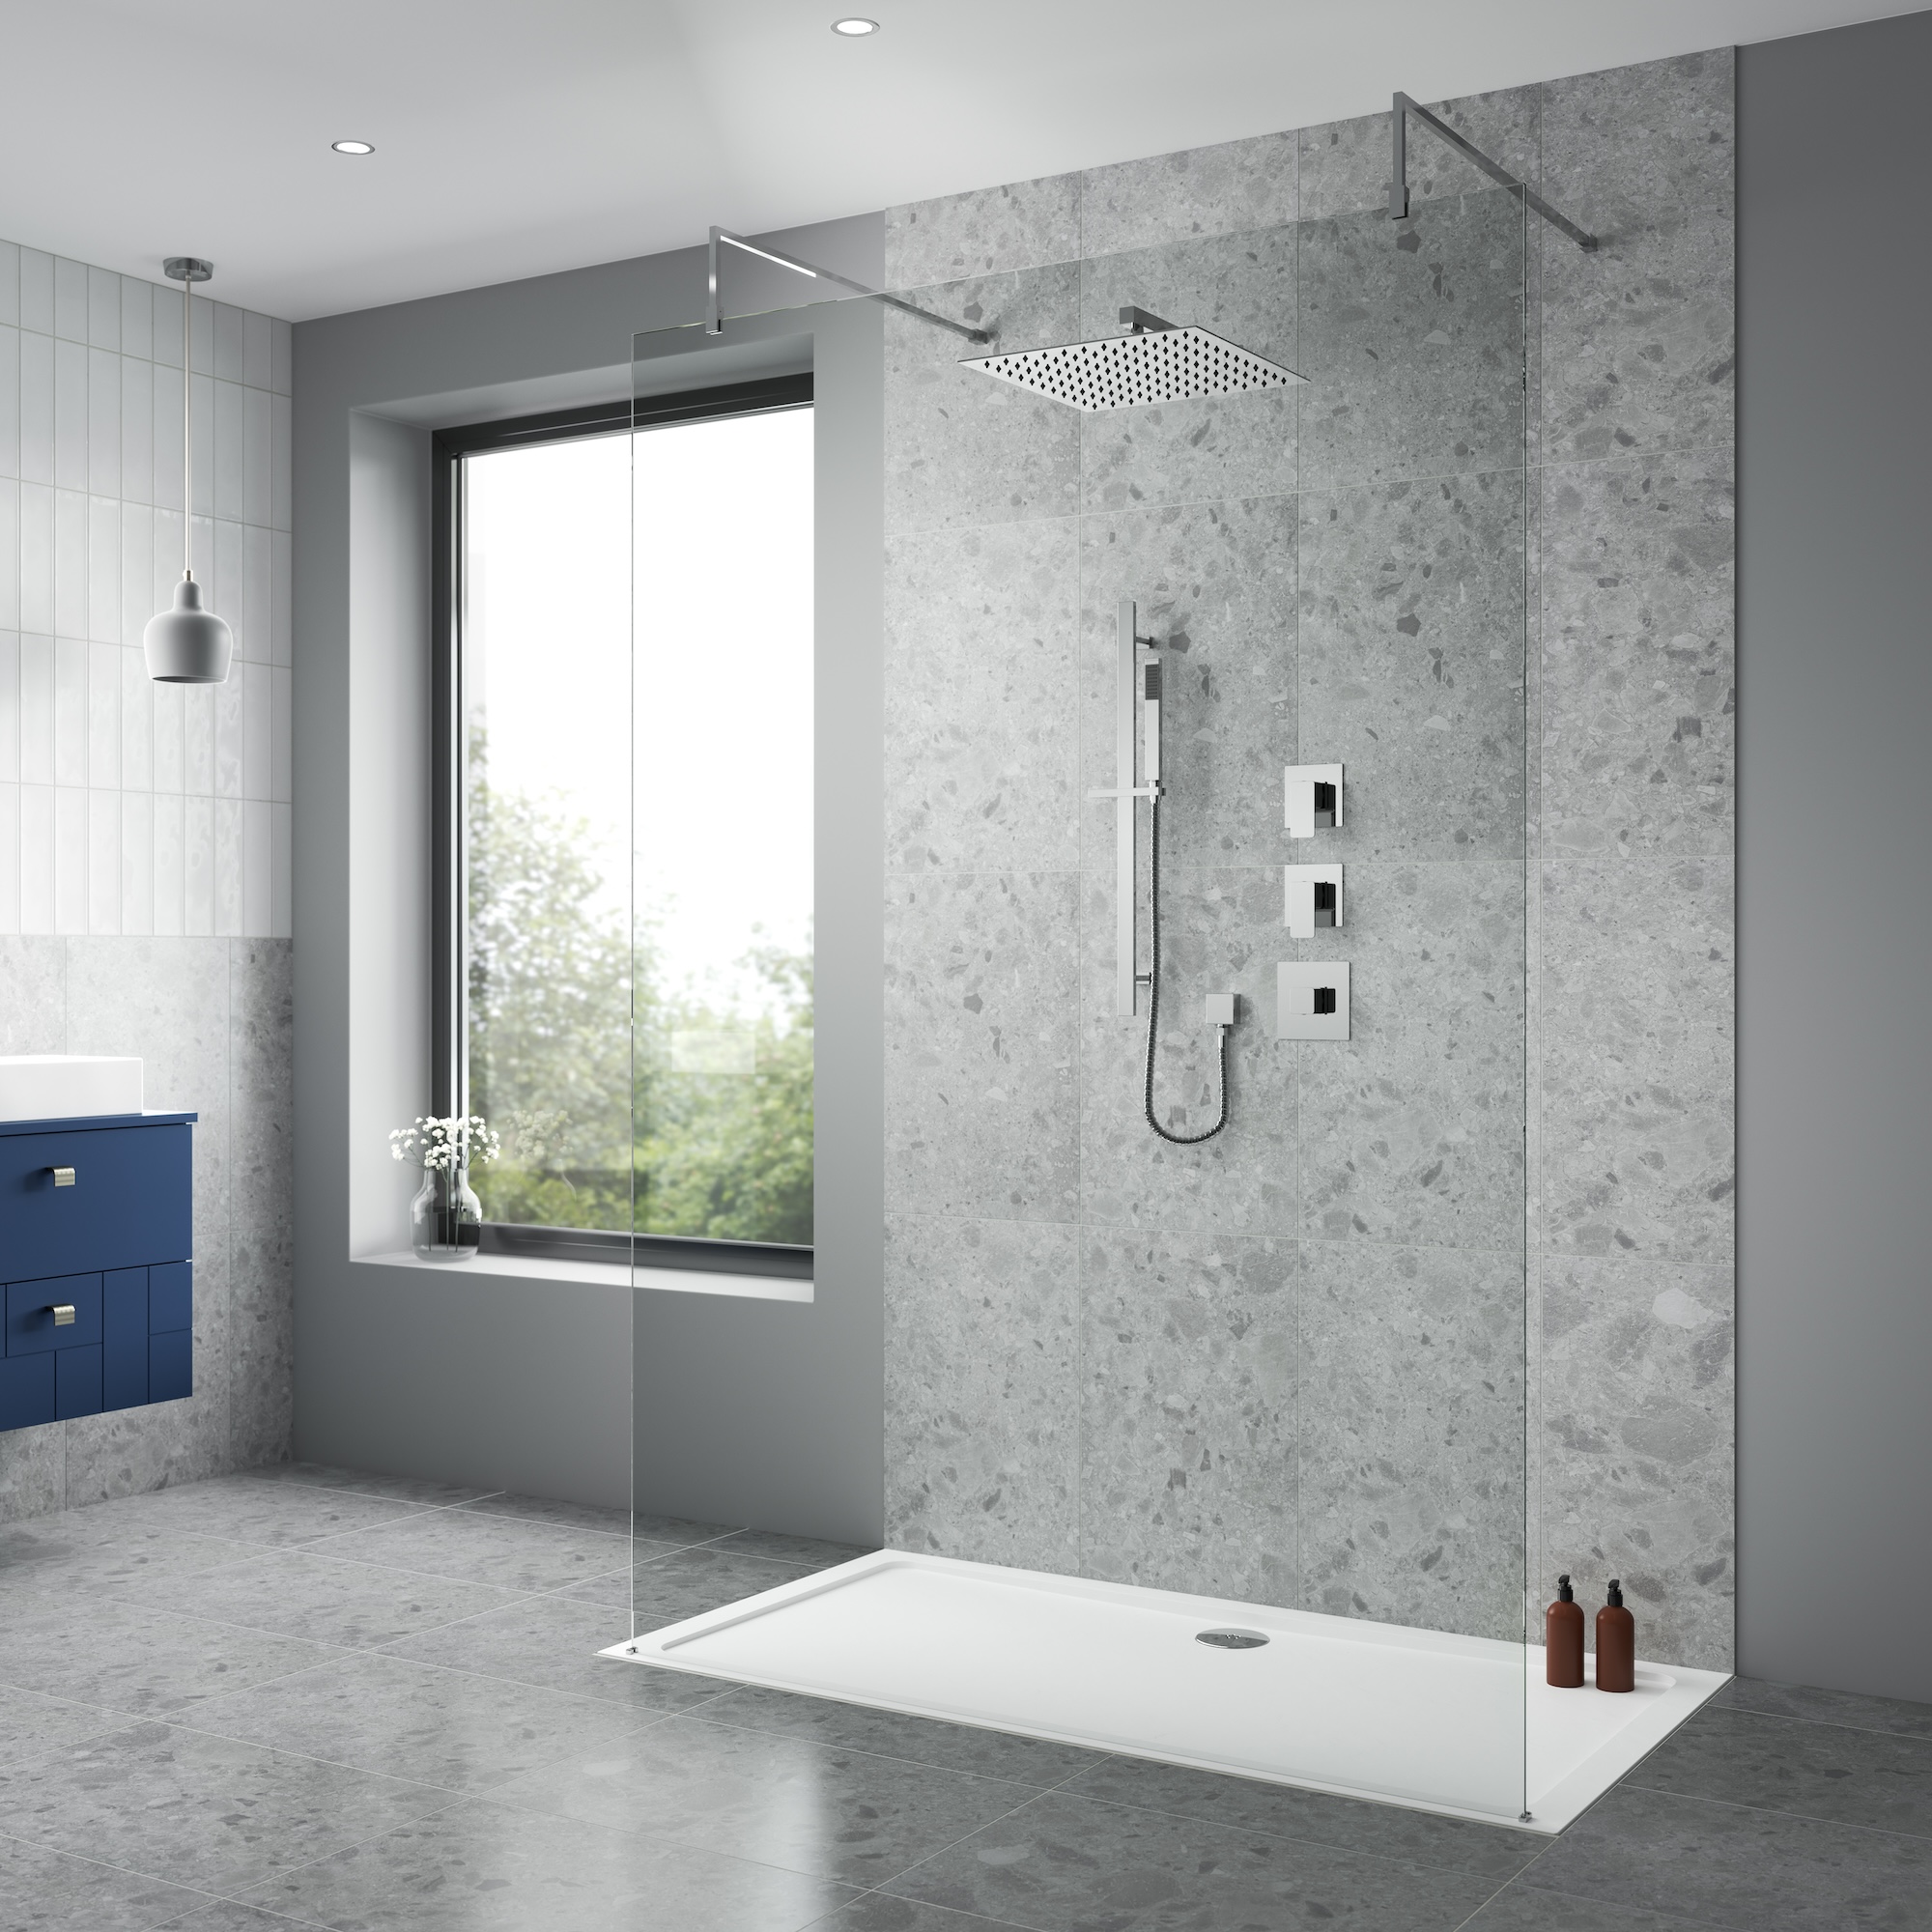 Picture of a luxury bathroom with a chrome mixer shower set